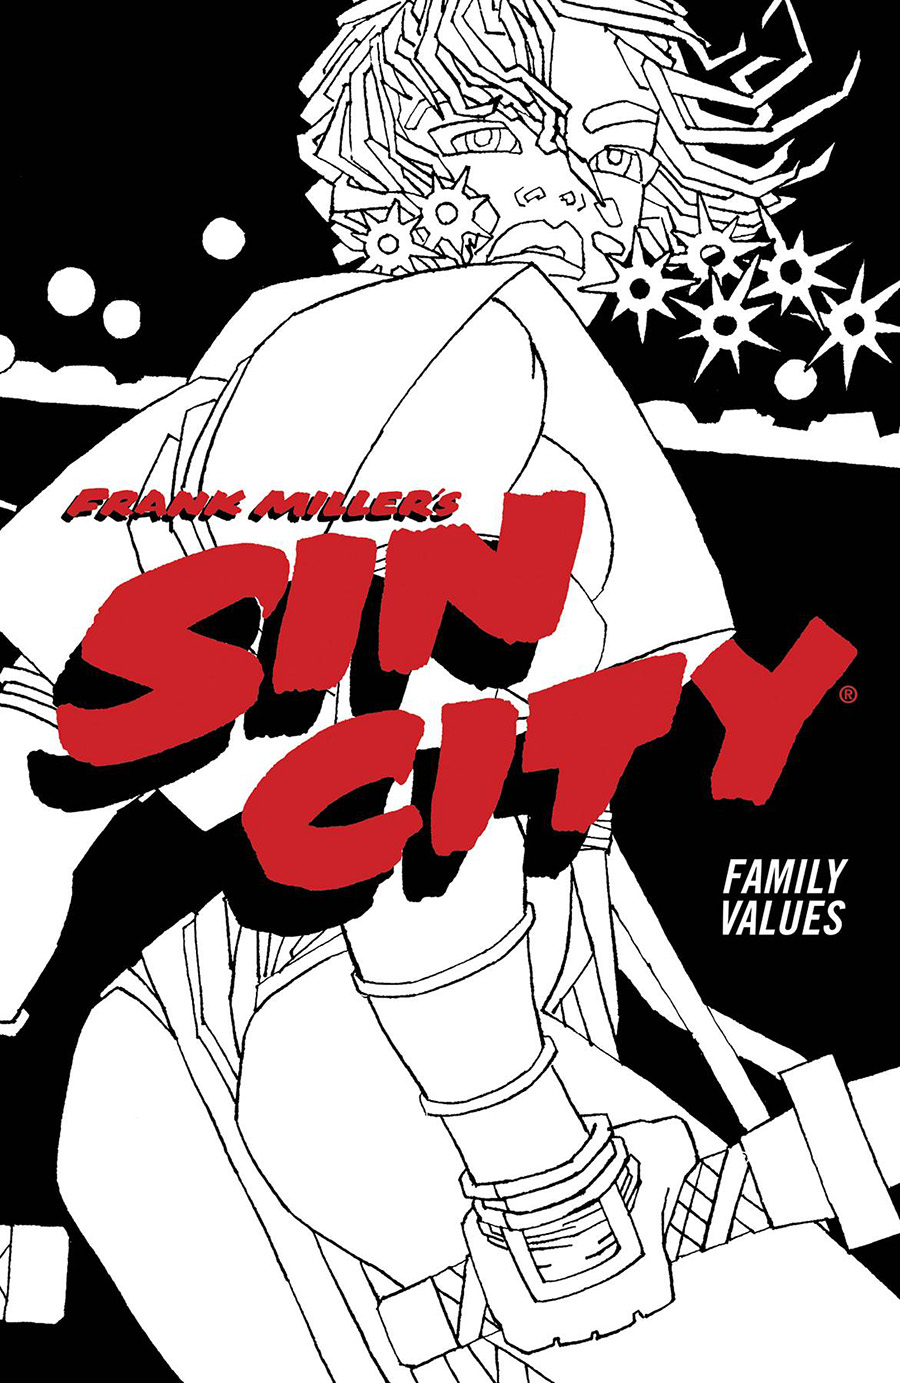 Frank Millers Sin City Vol 5 Family Values TP 4th Edition